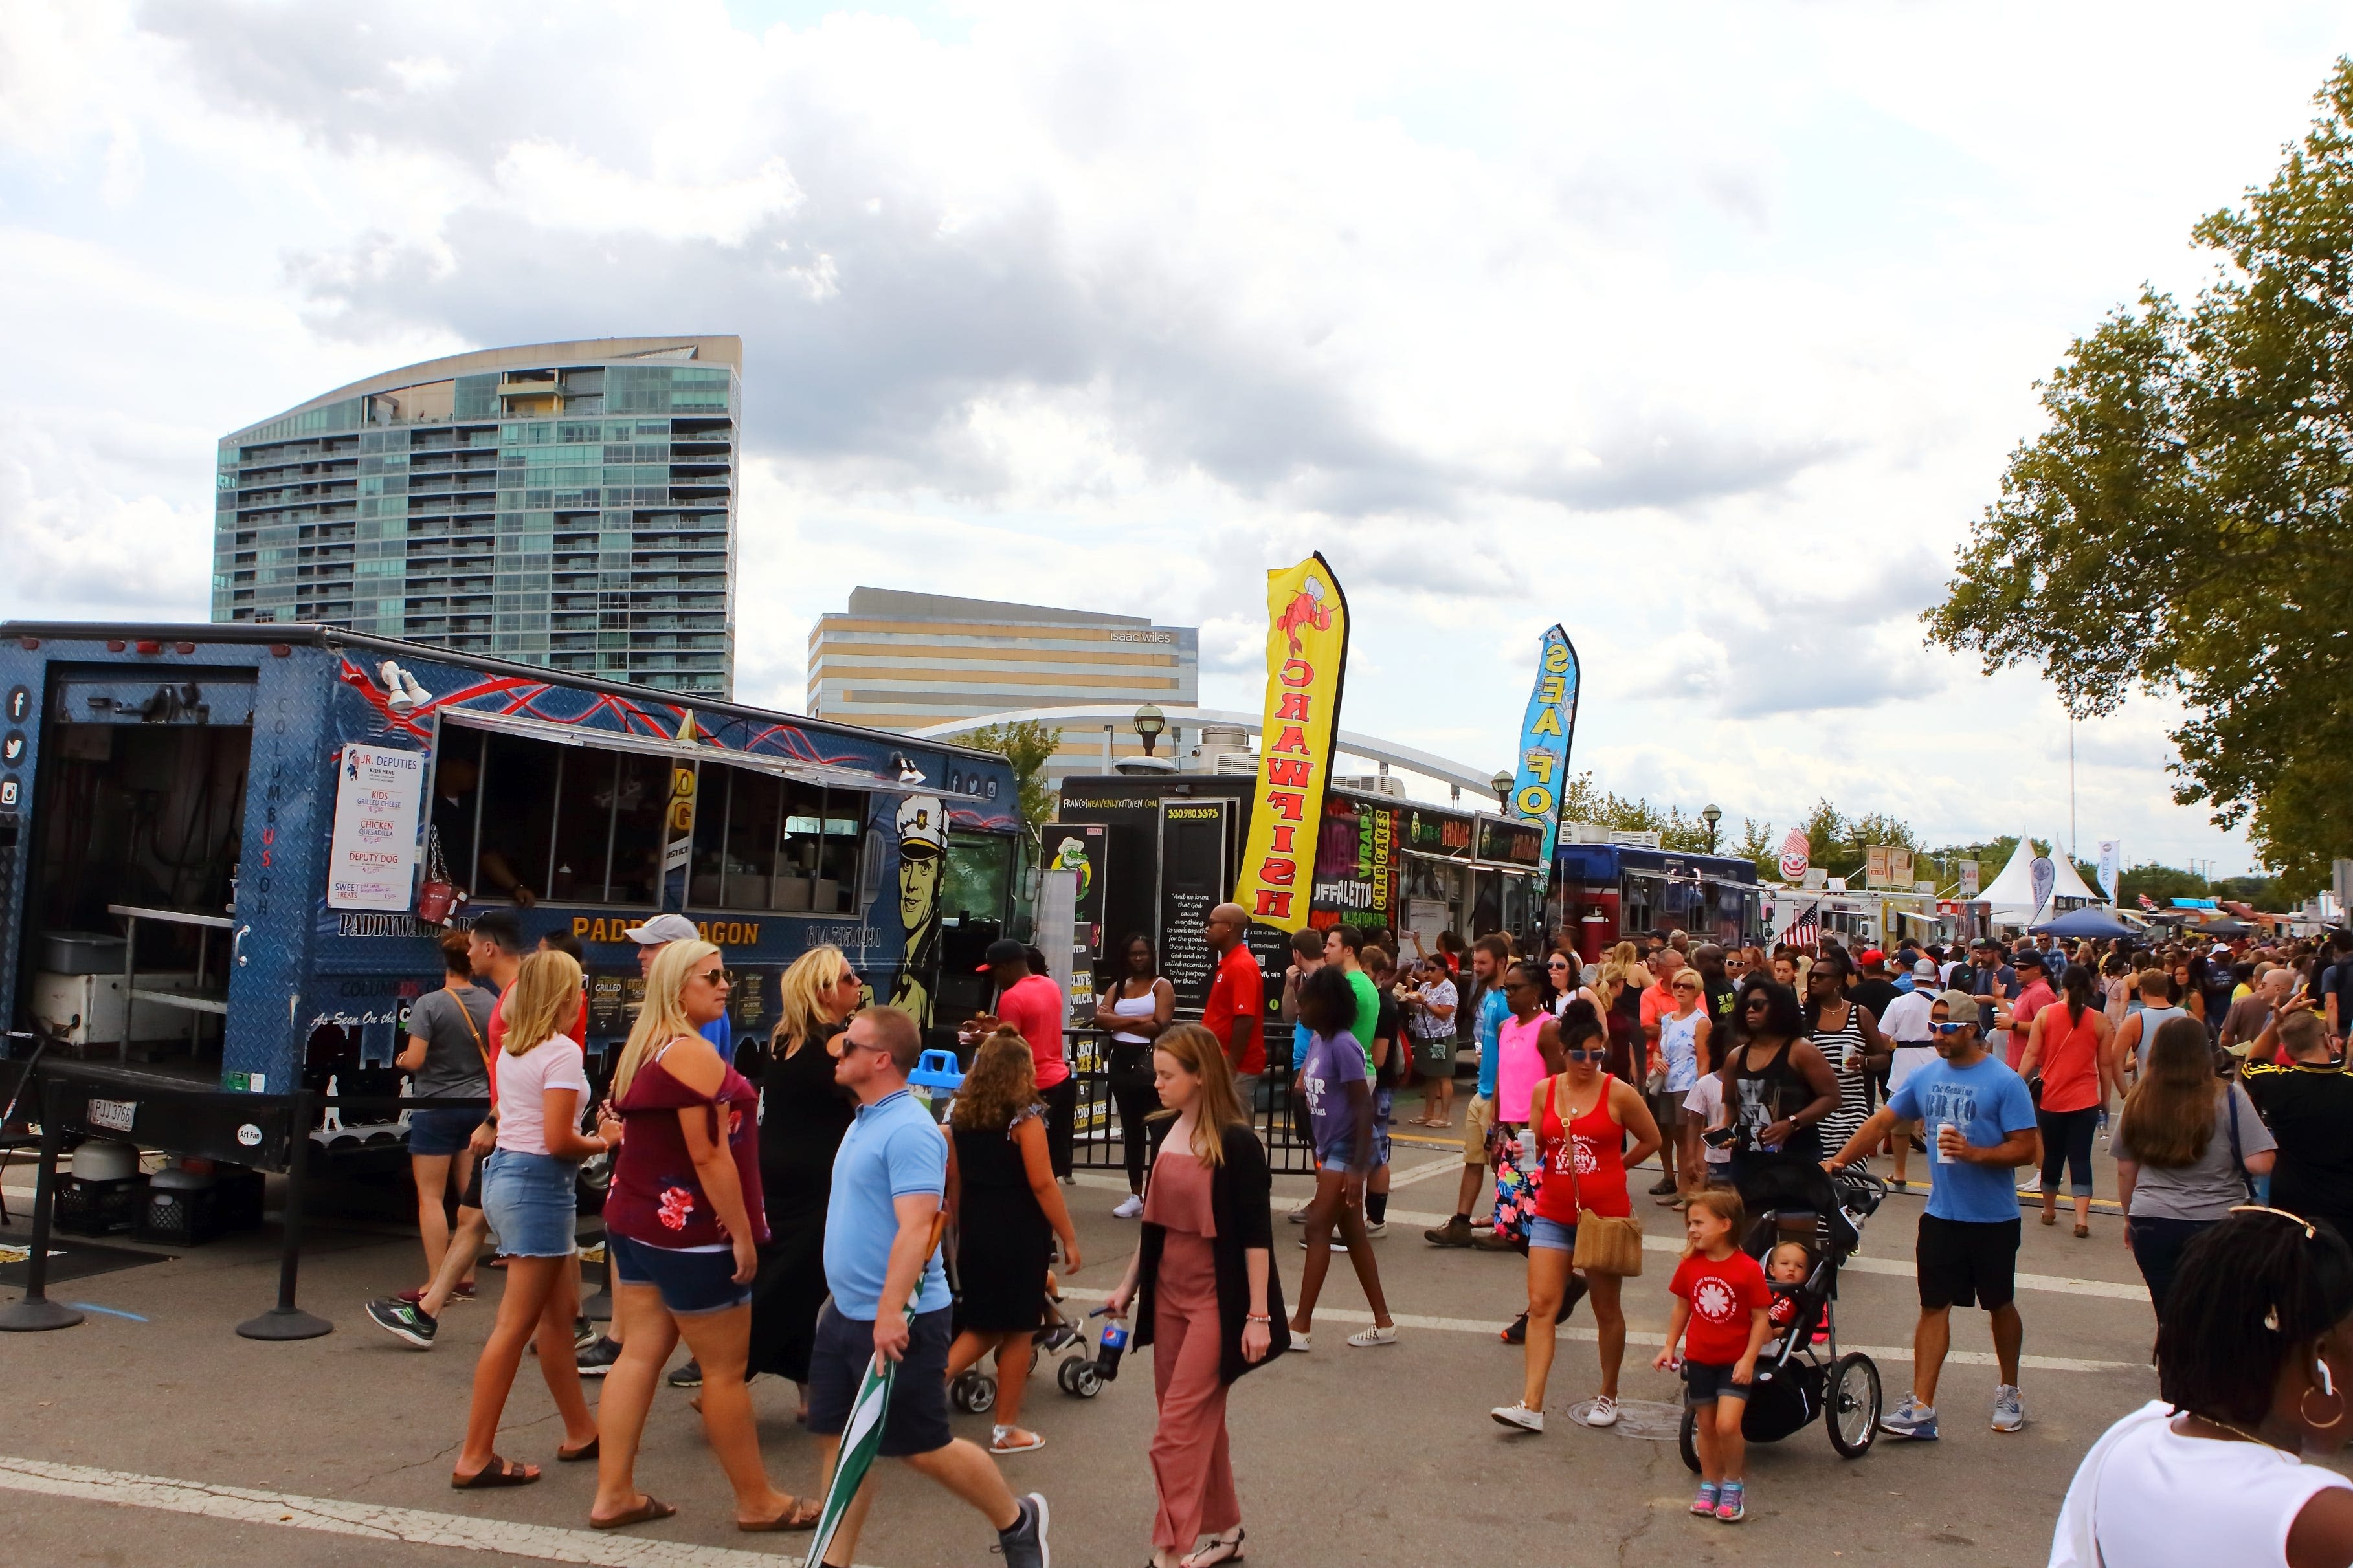 Columbus Food Truck Festival rolls into Franklinton this weekend with 55 Ohio vendors